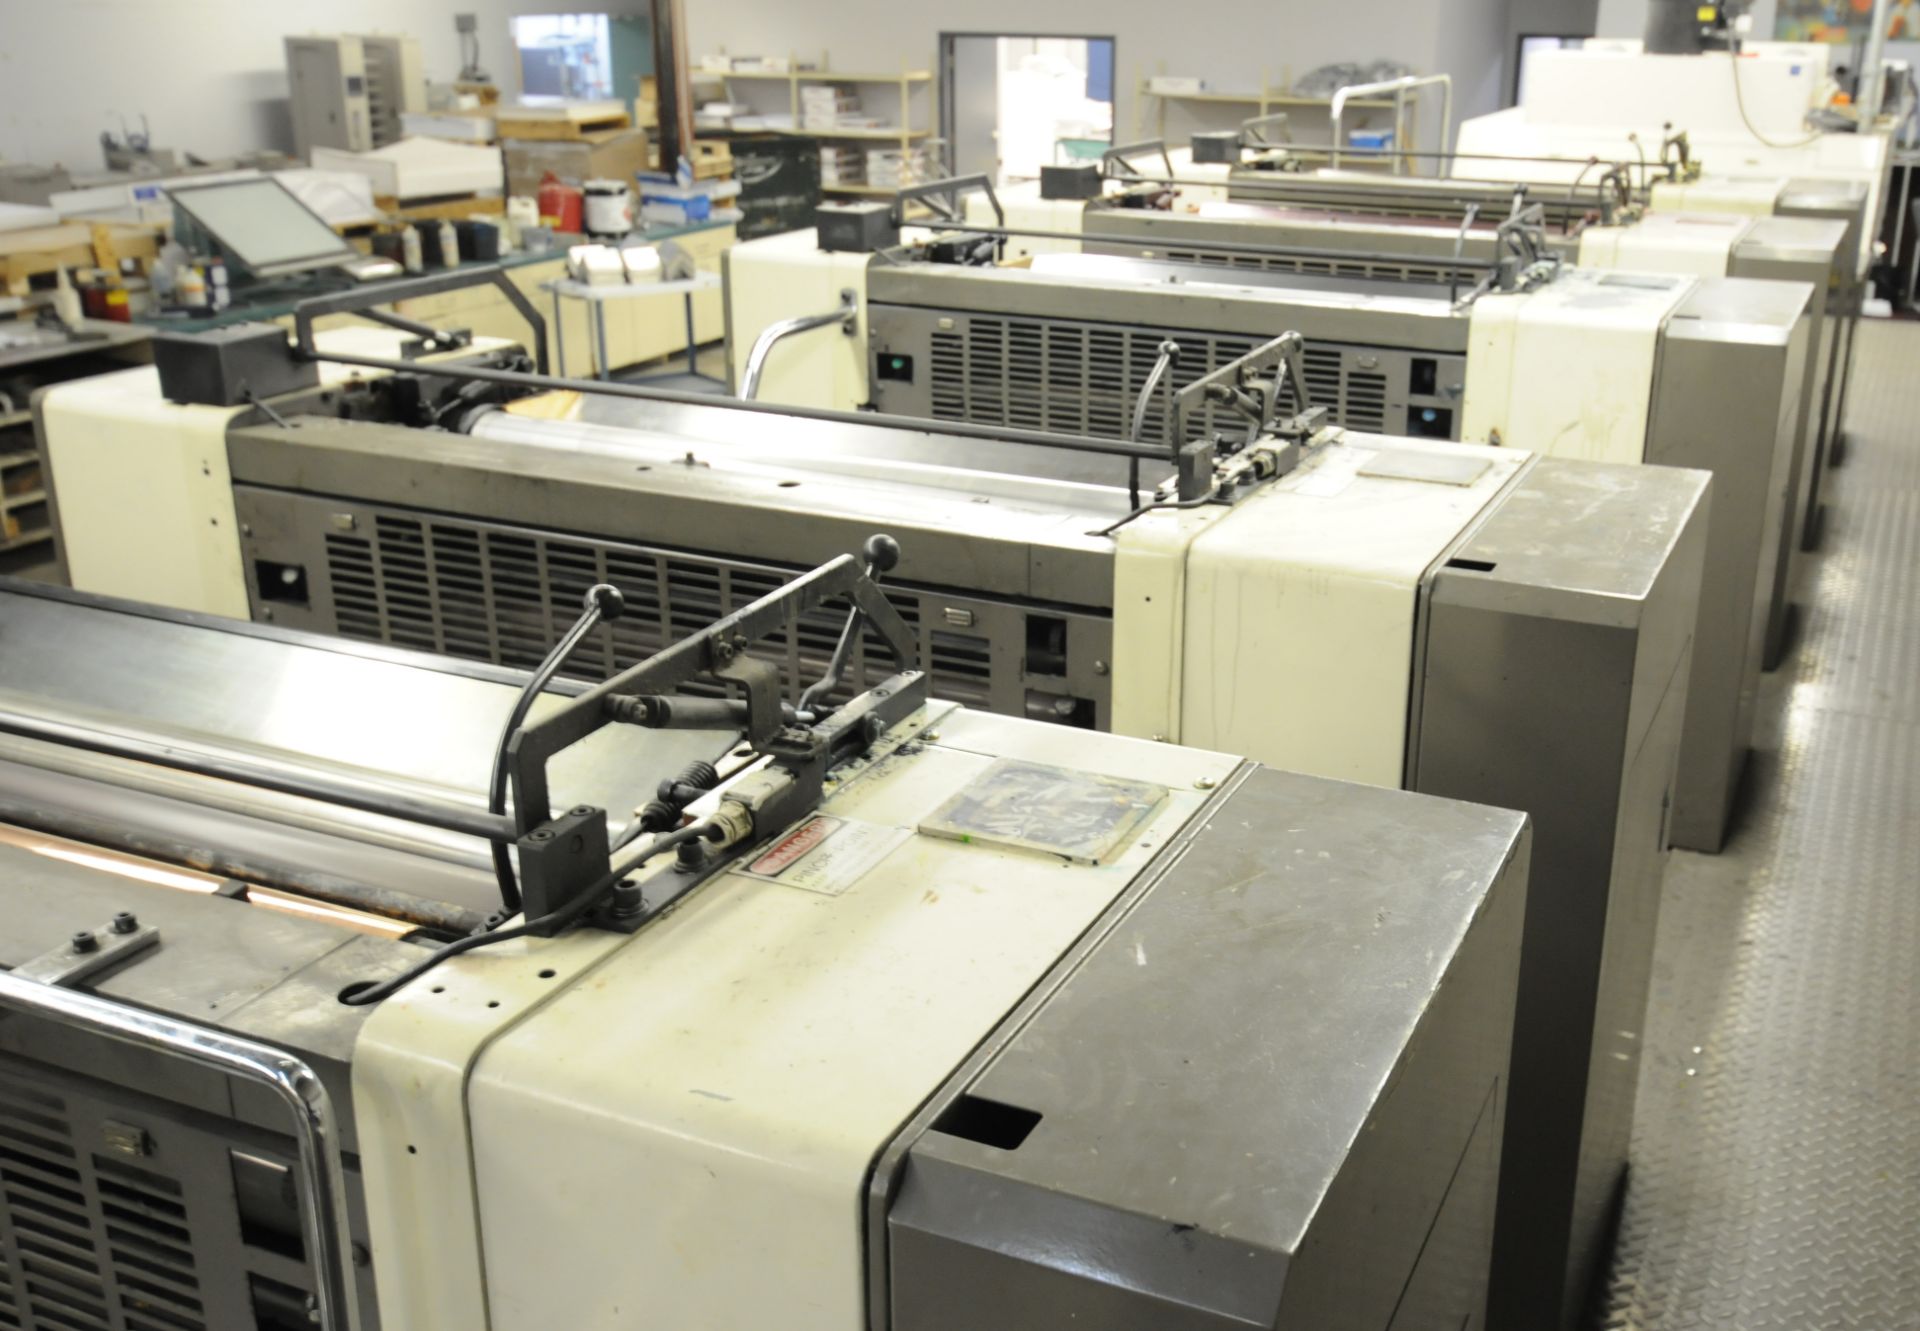 MITSUBISHI (2000) 3FR-5 (5) COLOR, 40"X28" SHEET-FEED OFFSET PERFECTOR PRESS WITH FULLY INTEGRATED - Image 13 of 13